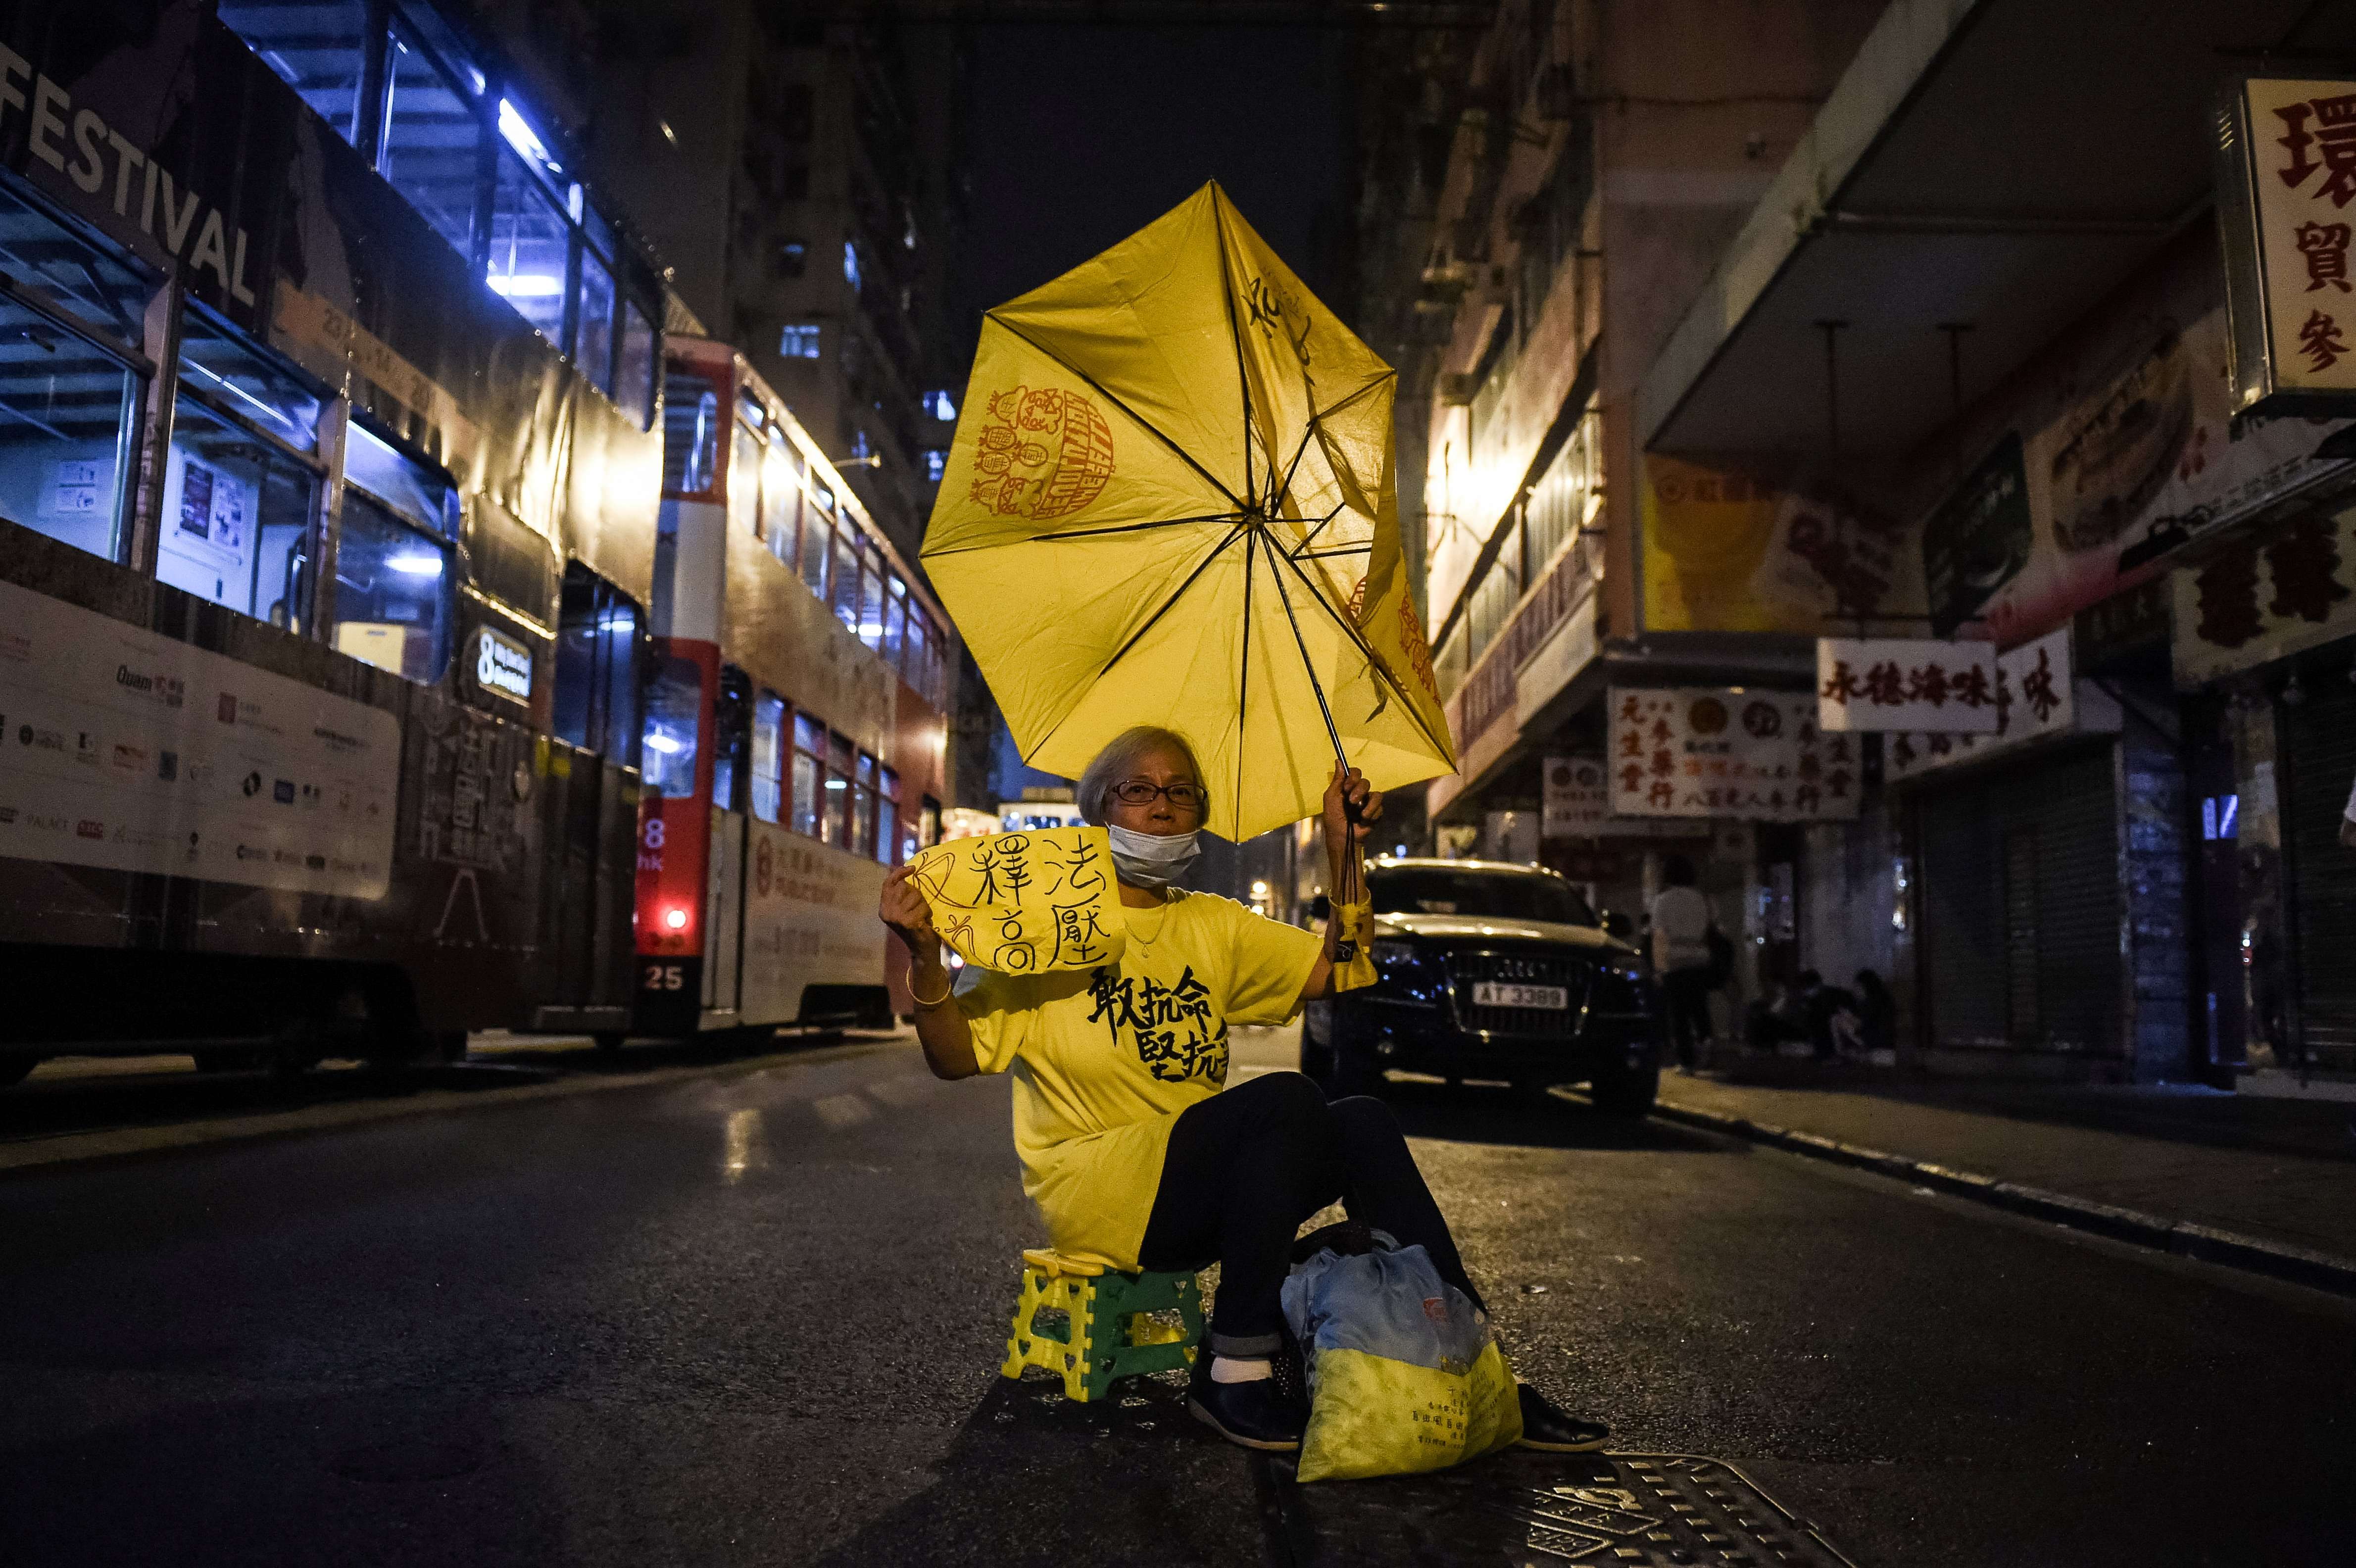 A protestor holds up a yellow umbrella in a street in Hong Kong on November 7, 2016. Hong Kong police used pepper spray November 6 to drive back hundreds of protesters angry at China's decision to intervene in a row over whether two pro-independence lawmakers should be barred from the city's legislature. Photo: AFP